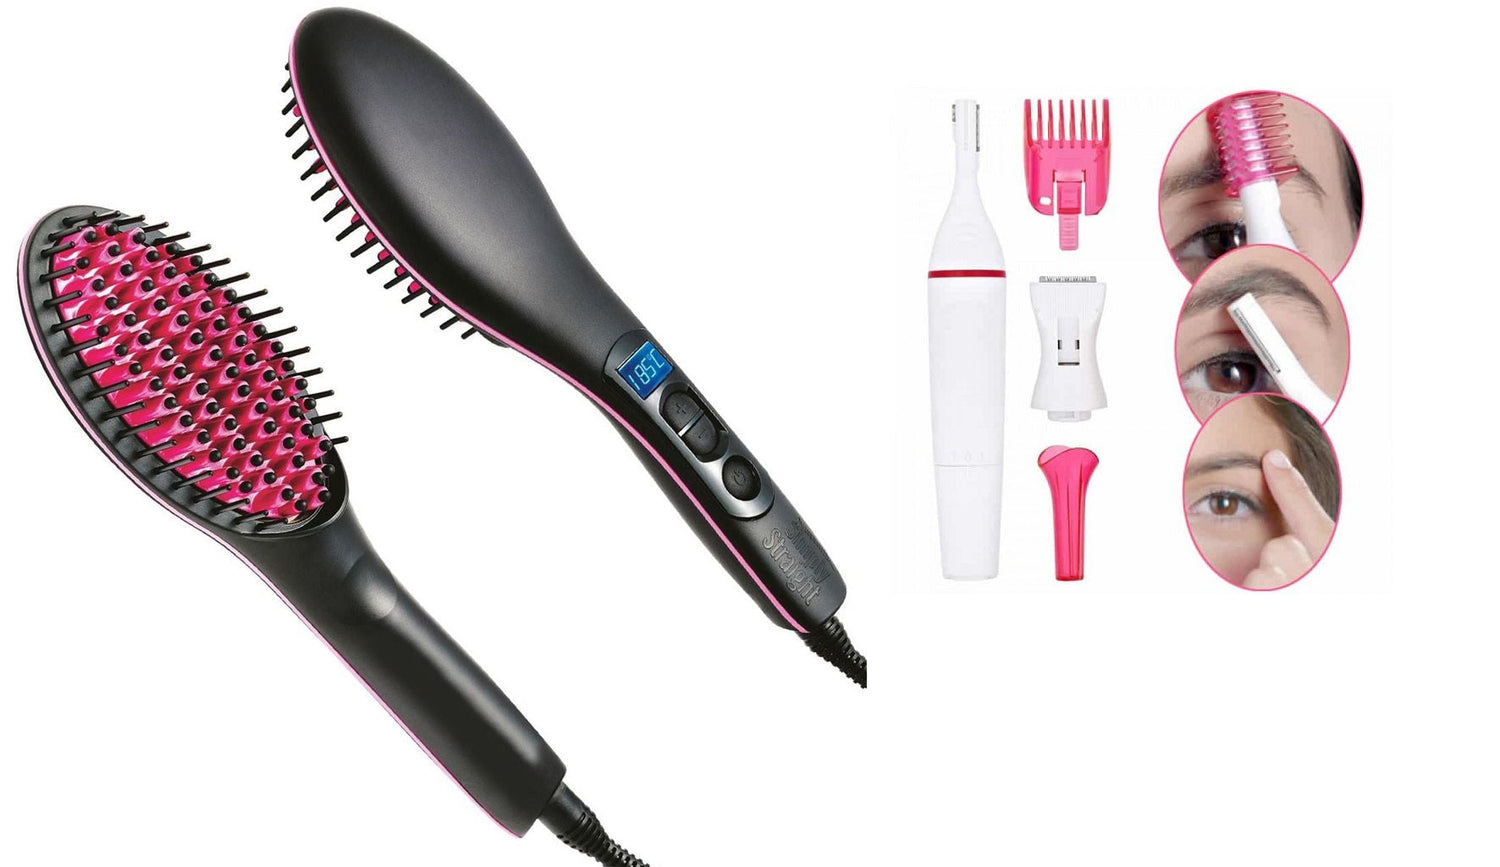 Perie indreptat parul Straight Artifact + Trimmer electric Sweet Precision